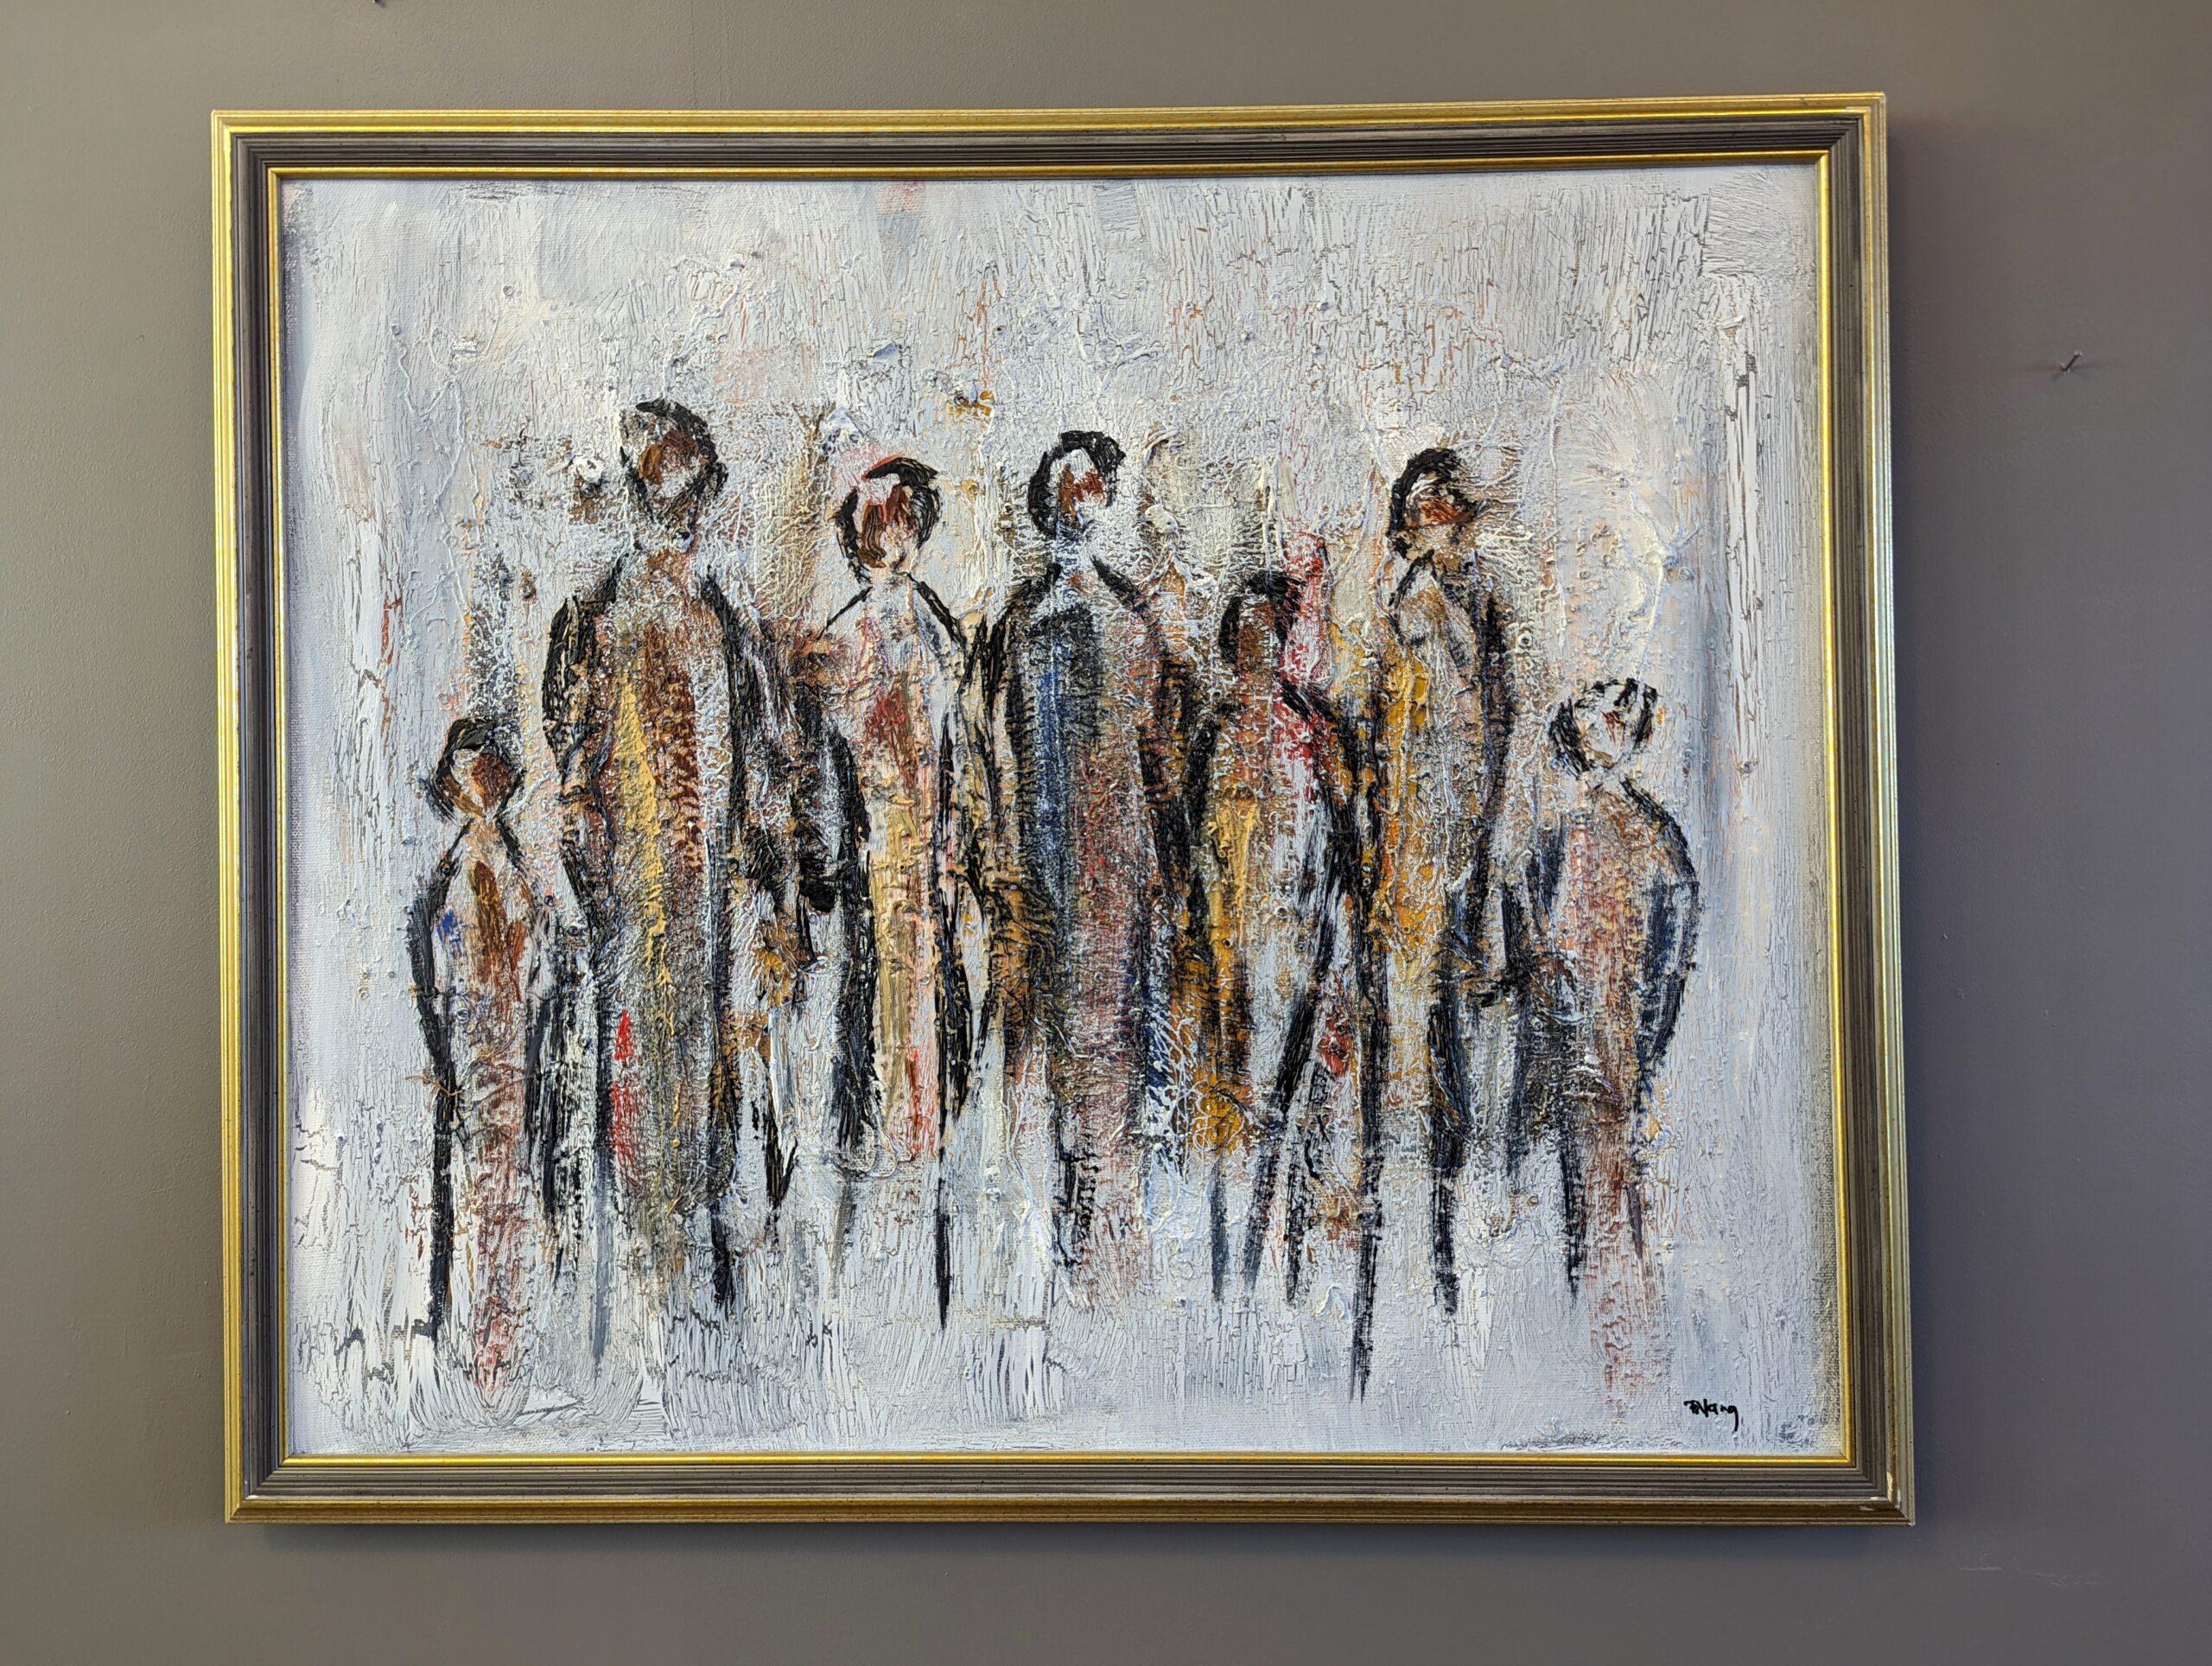 ALL TOGETHER 
Size: 55 x 64.5 cm (including frame)
Oil on canvas

A richly textured mid-century abstract figurative painting, executed in oil onto canvas.

Simple yet effective in its composition, a group of enigmatic figures takes center stage, and